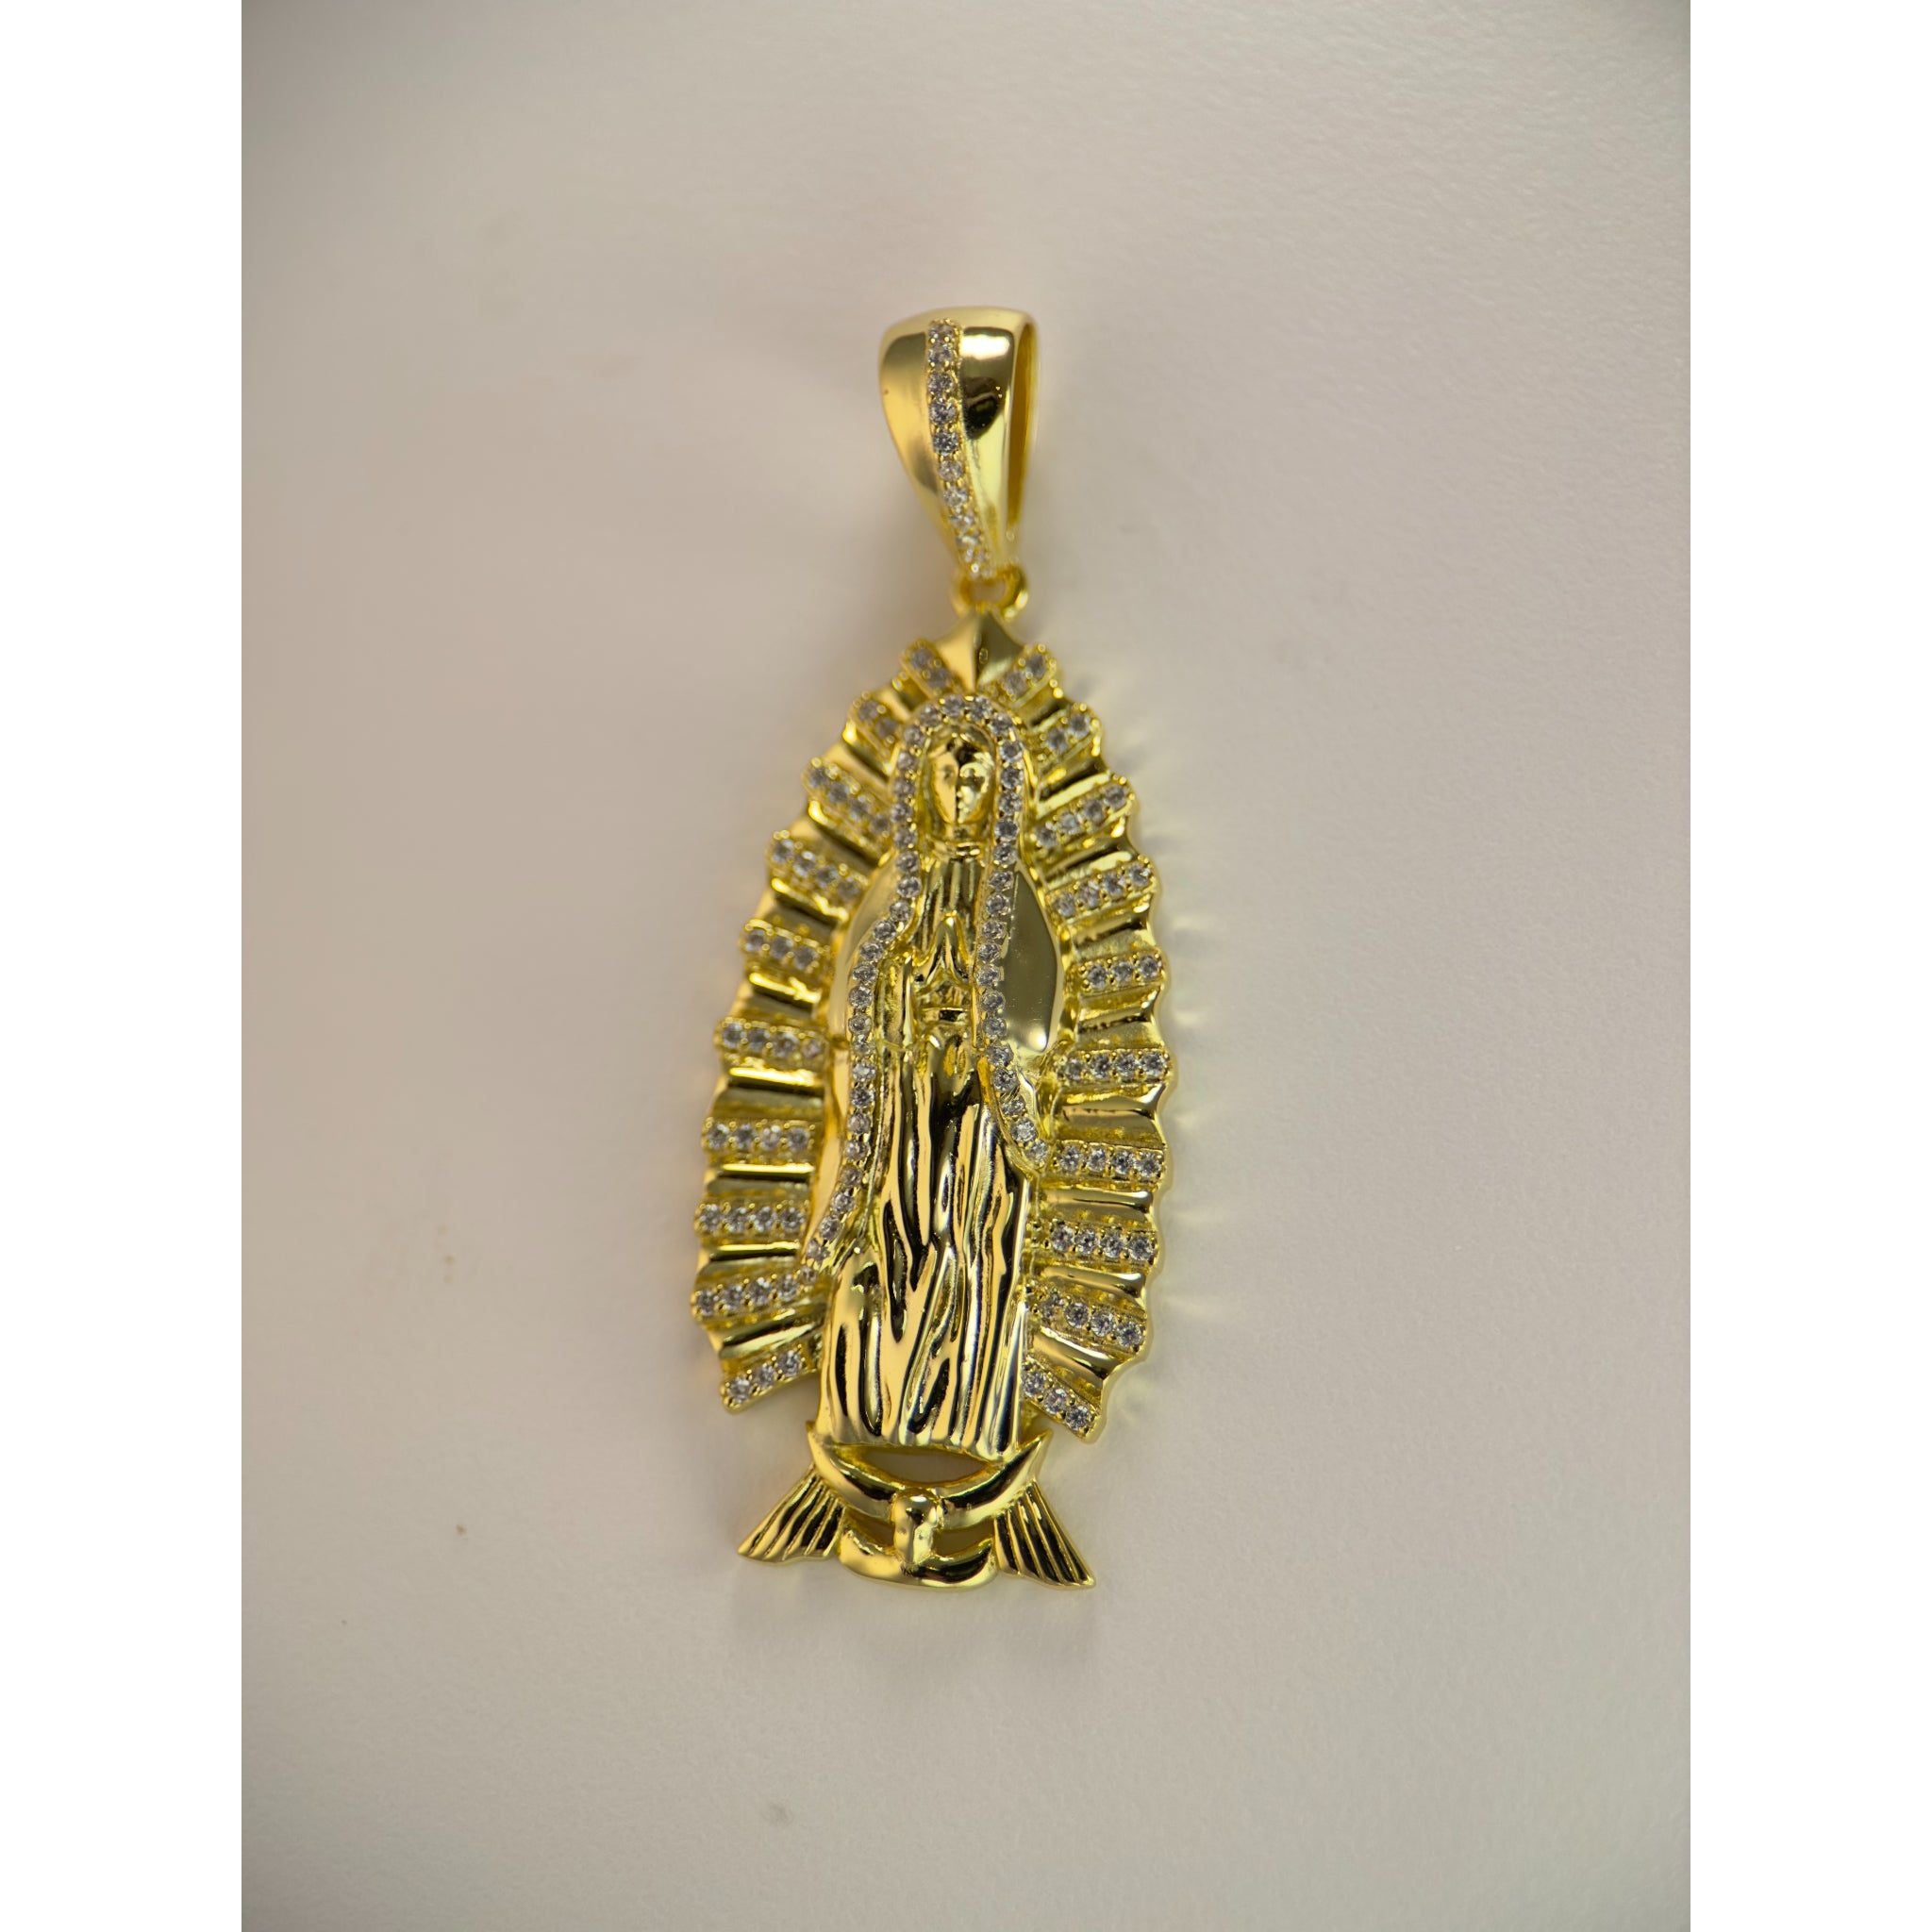 DR3172 - 925 Sterling Silver,14k Gold Bonded - Lab Created Stones - Pendant - Blessed Mother Pendant